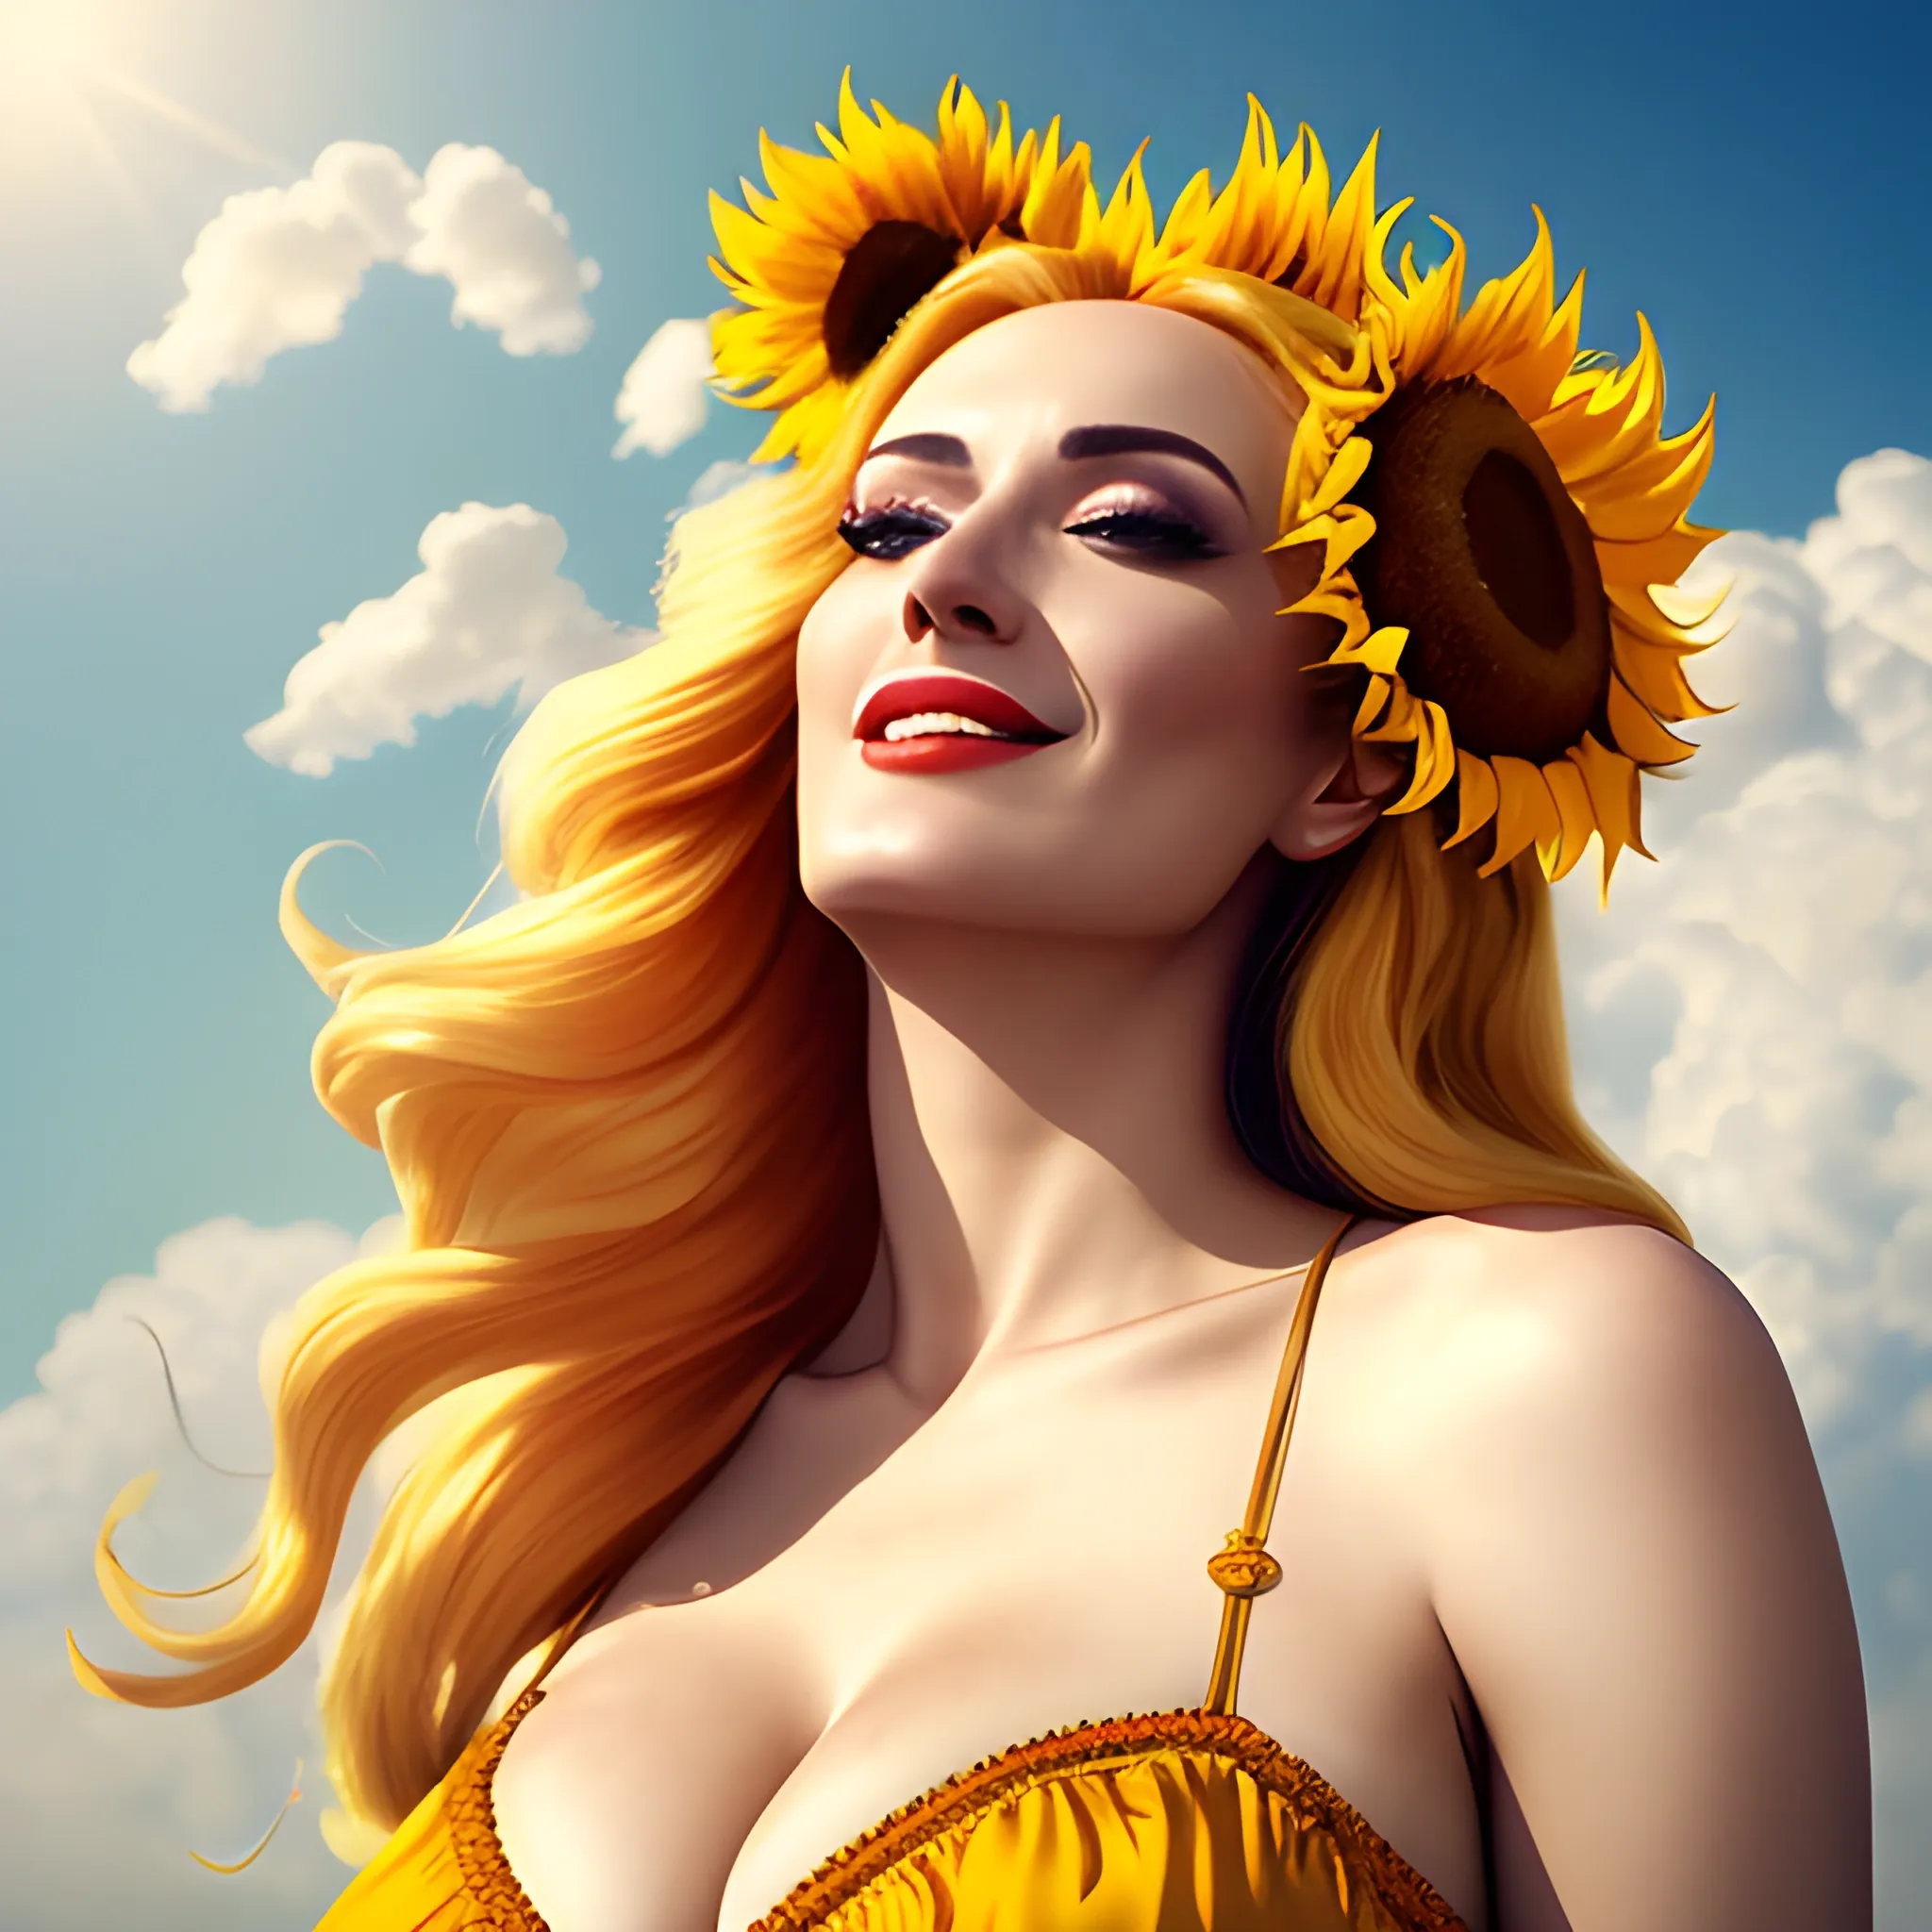 tmasterpiece, high high quality, cinematic Film still from, one-girl,Golden hair,Sunflowers are worn on the head, floating in sky, Cloud Girl, Clouds, (closeup cleavage: 1.1), brightly, cheerfulness, intriguing, gentlesoftlighting, (bauhause, Shape, lineworks, abstracted: 1.1), 